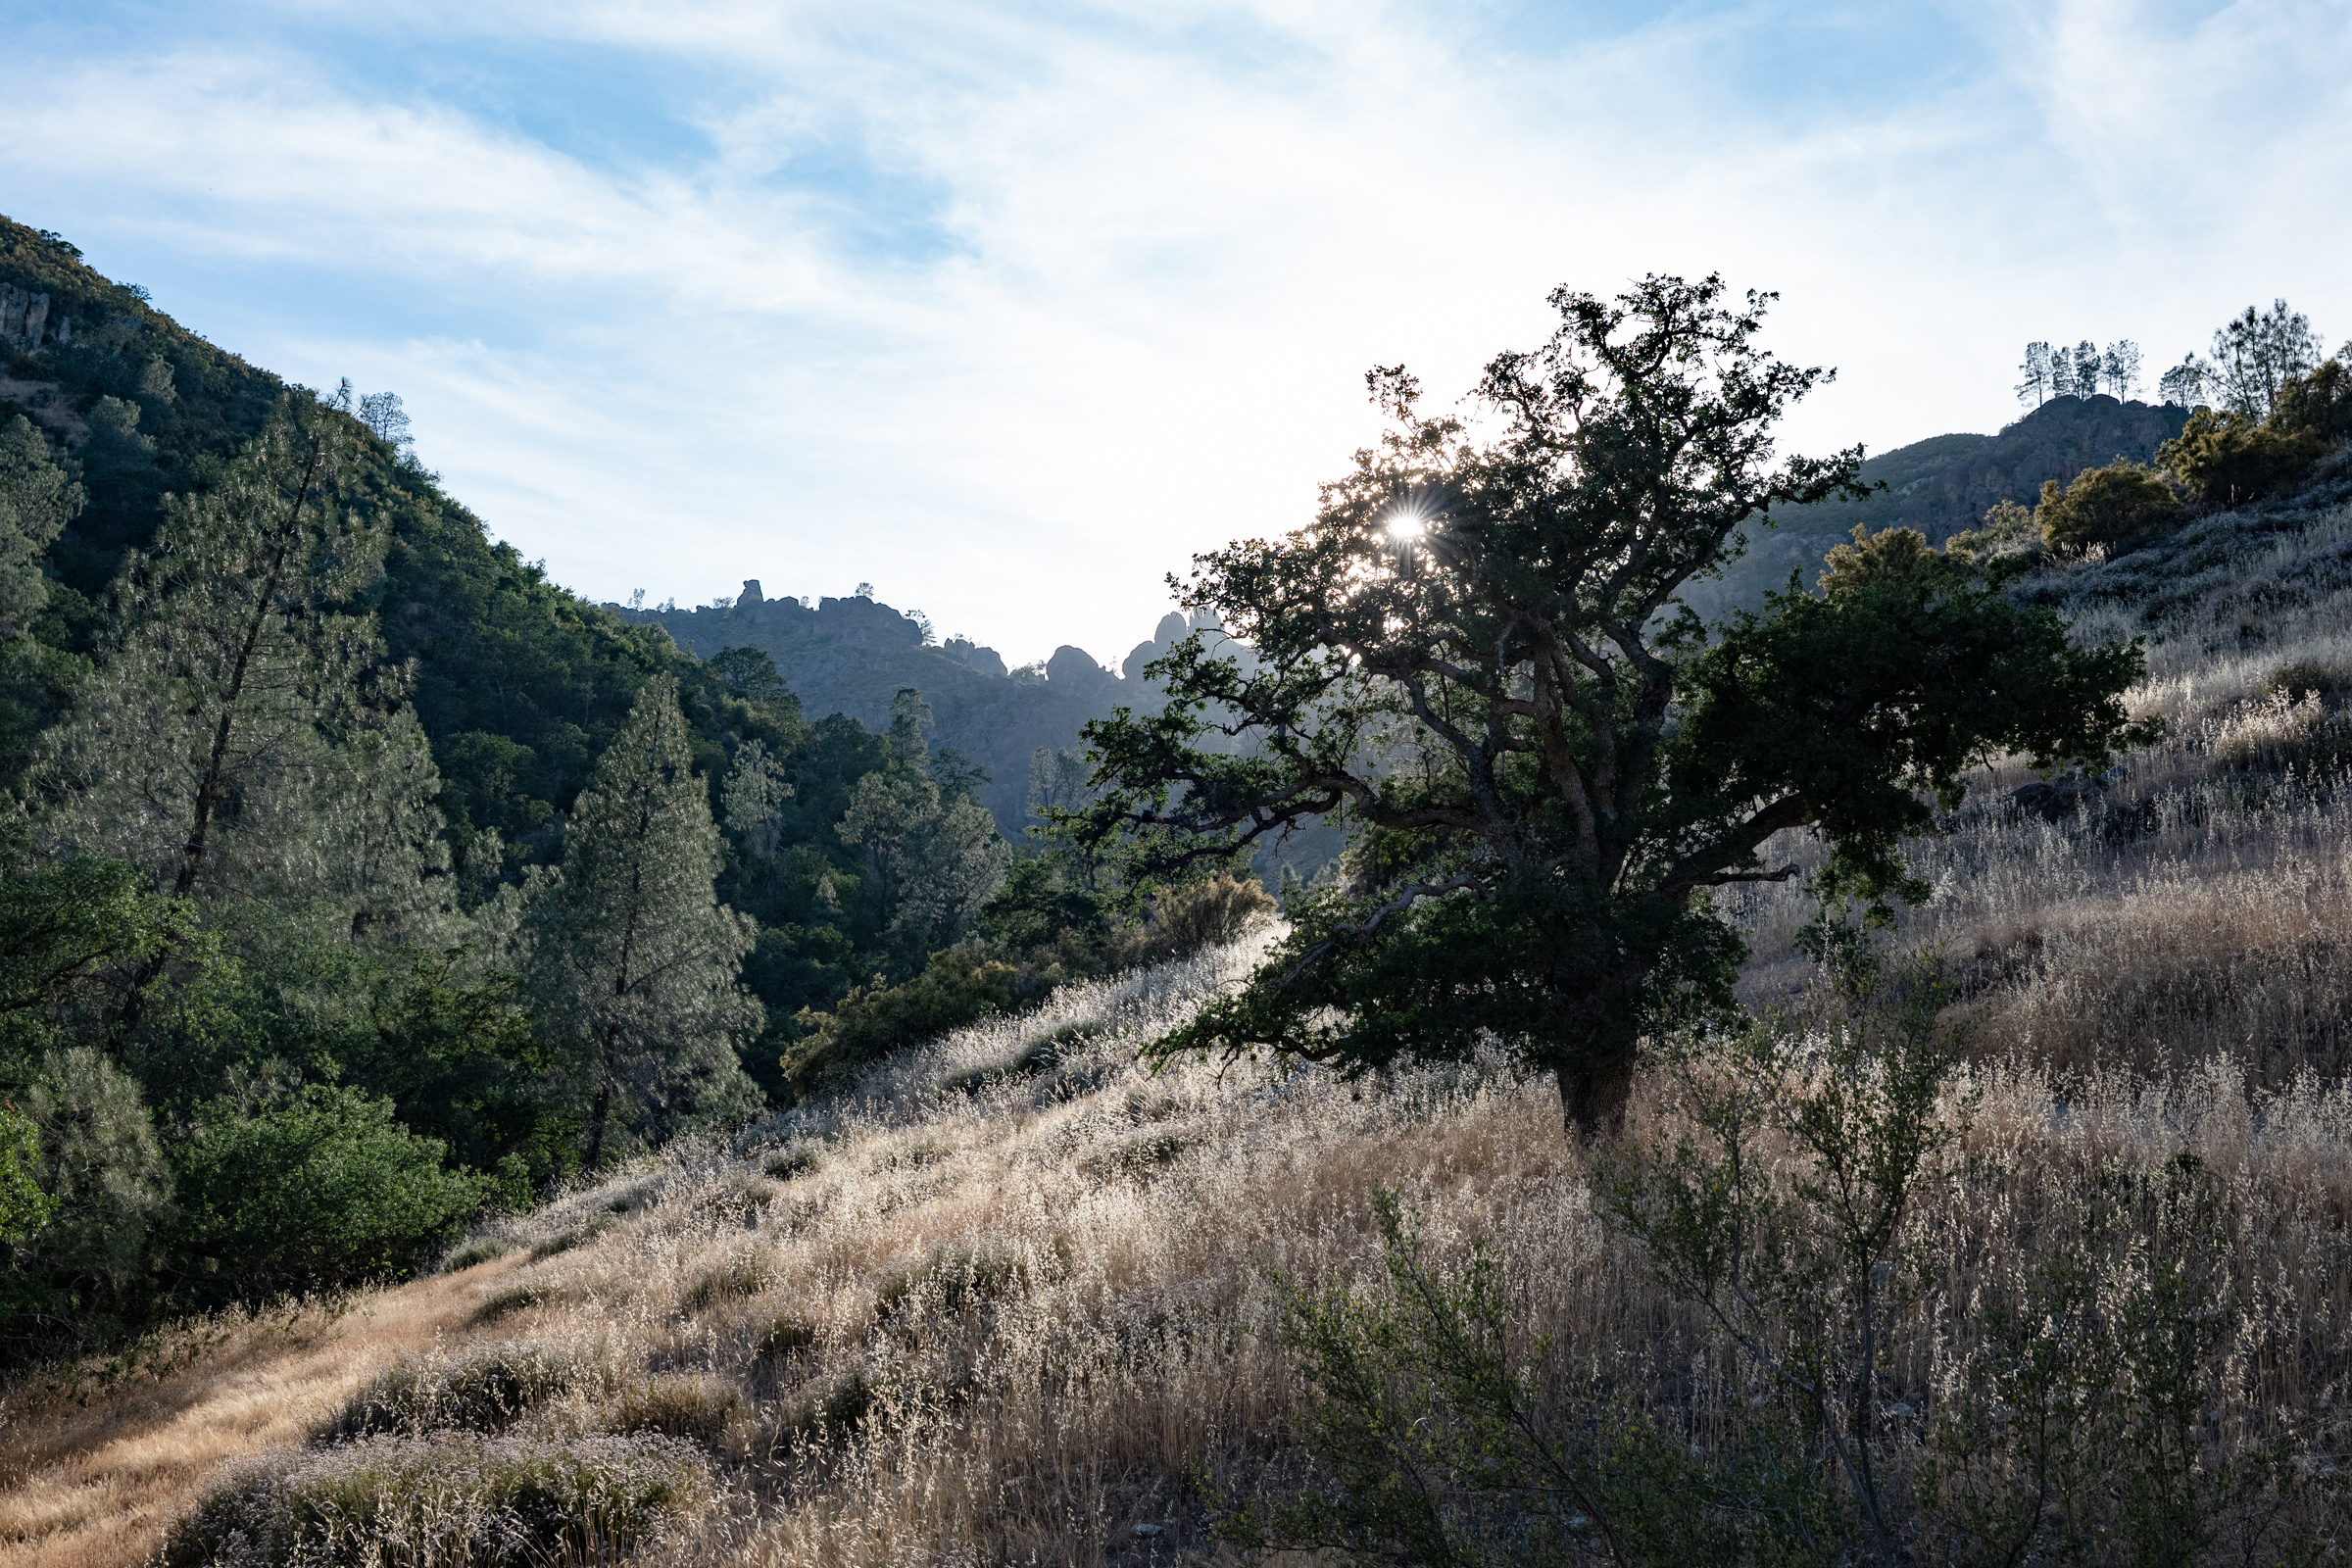 A Day Trip to Pinnacles National Park